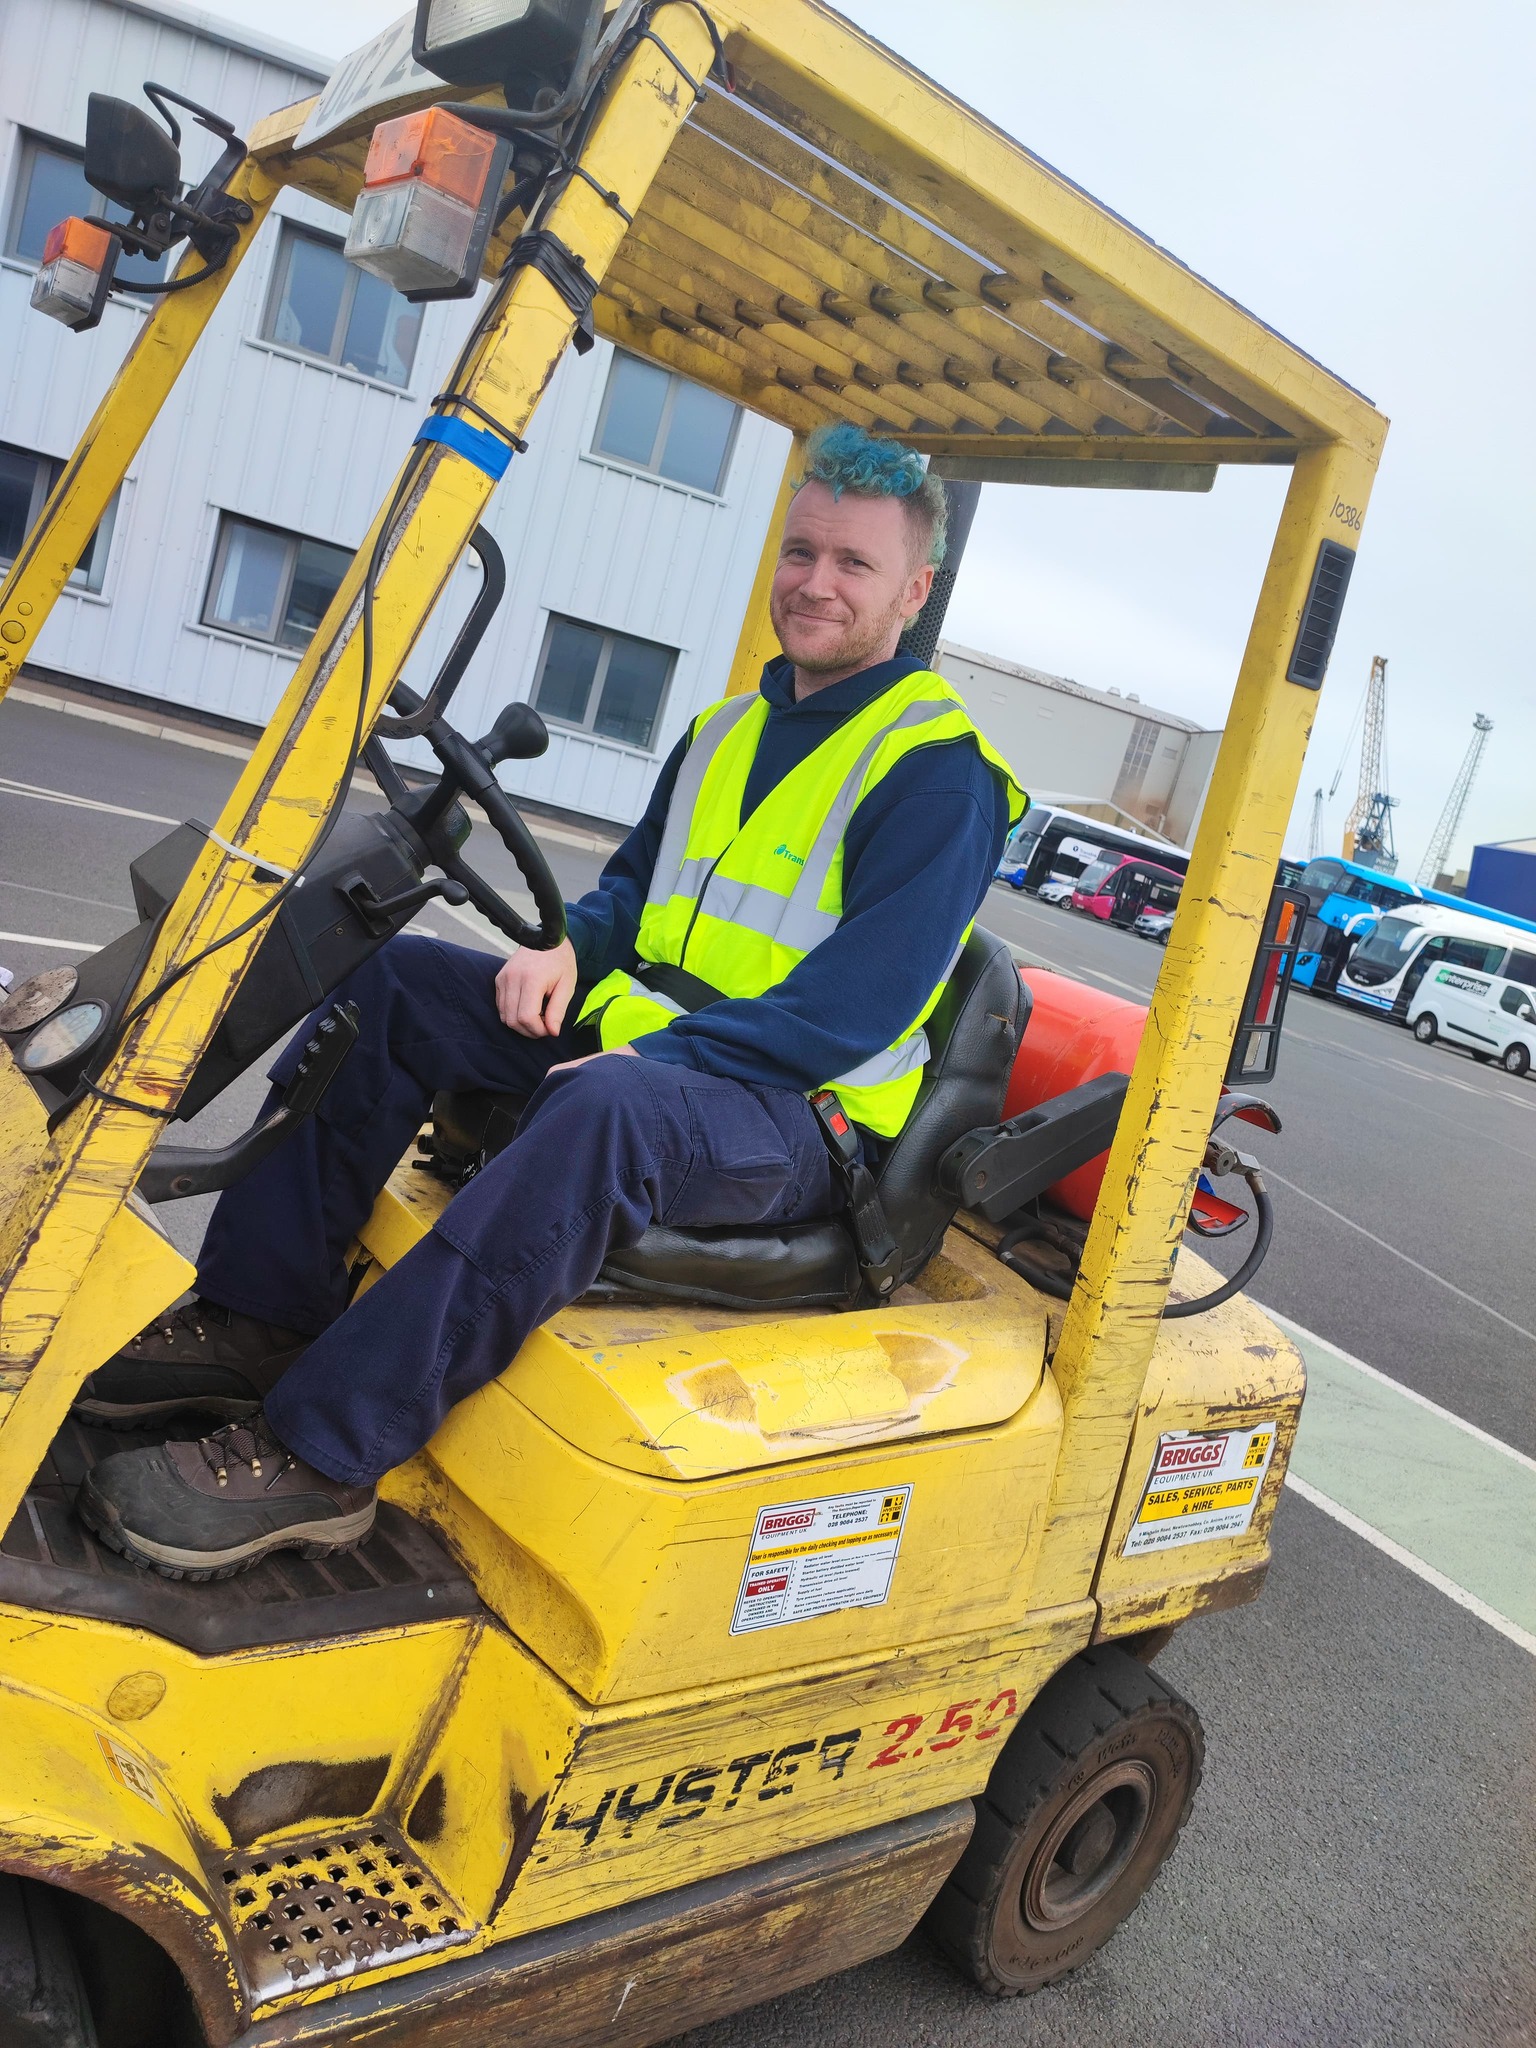 Great Forklift Training Company - Forklift Training Provider In Larne near me